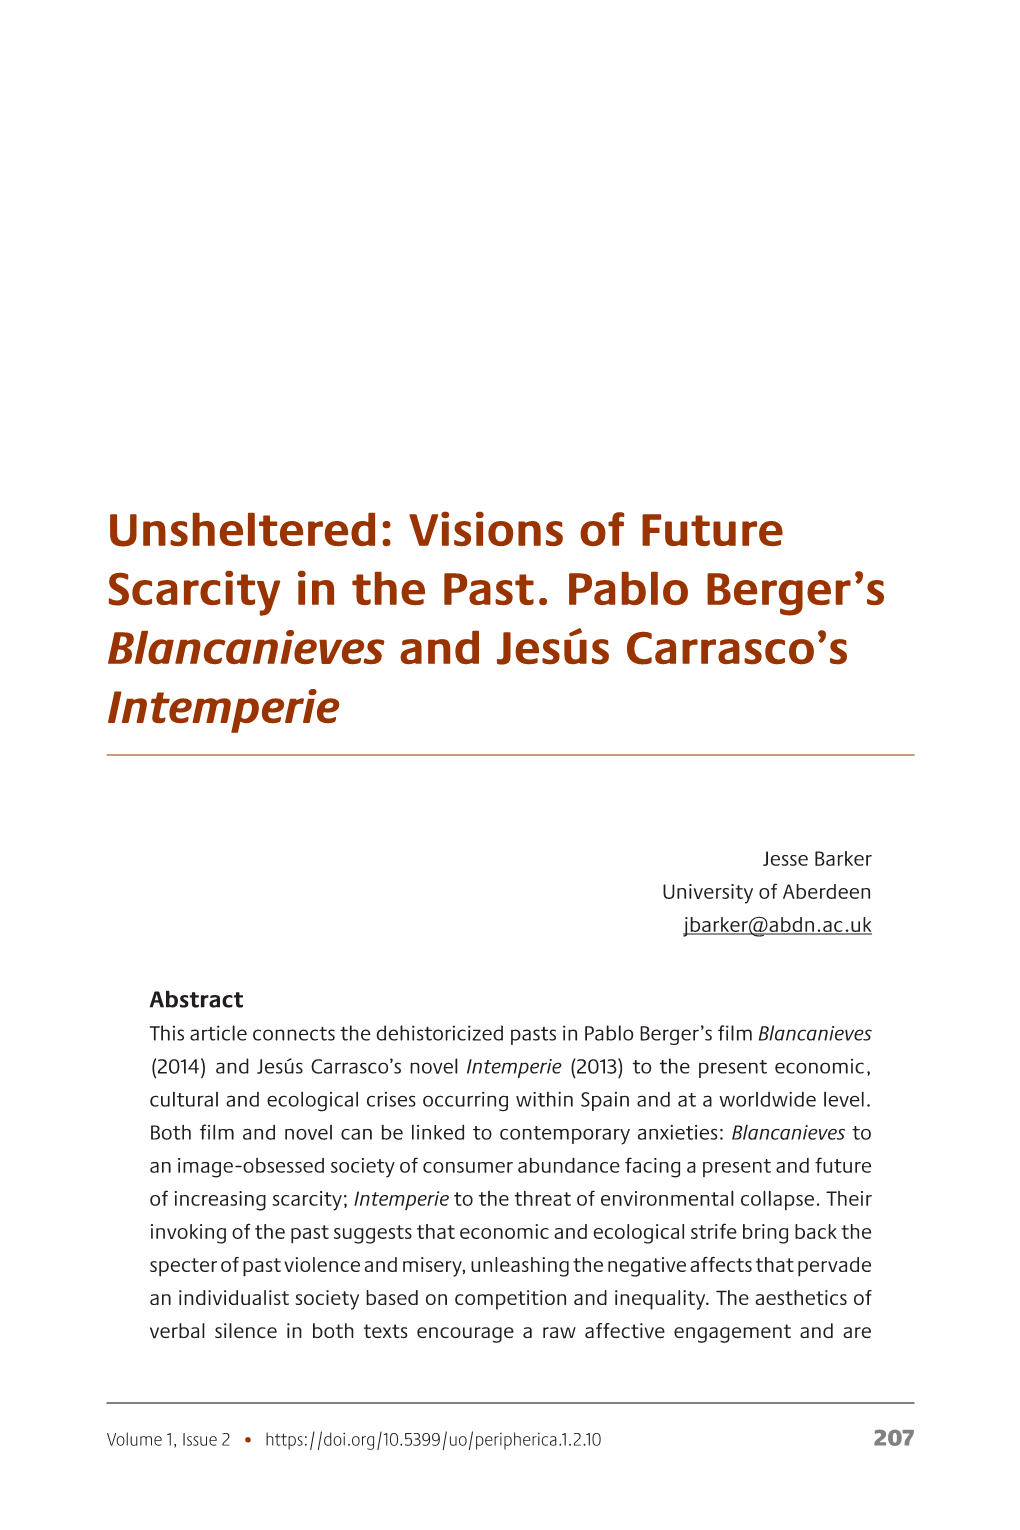 Visions of Future Scarcity in the Past. Pablo Berger's Blancanieves And